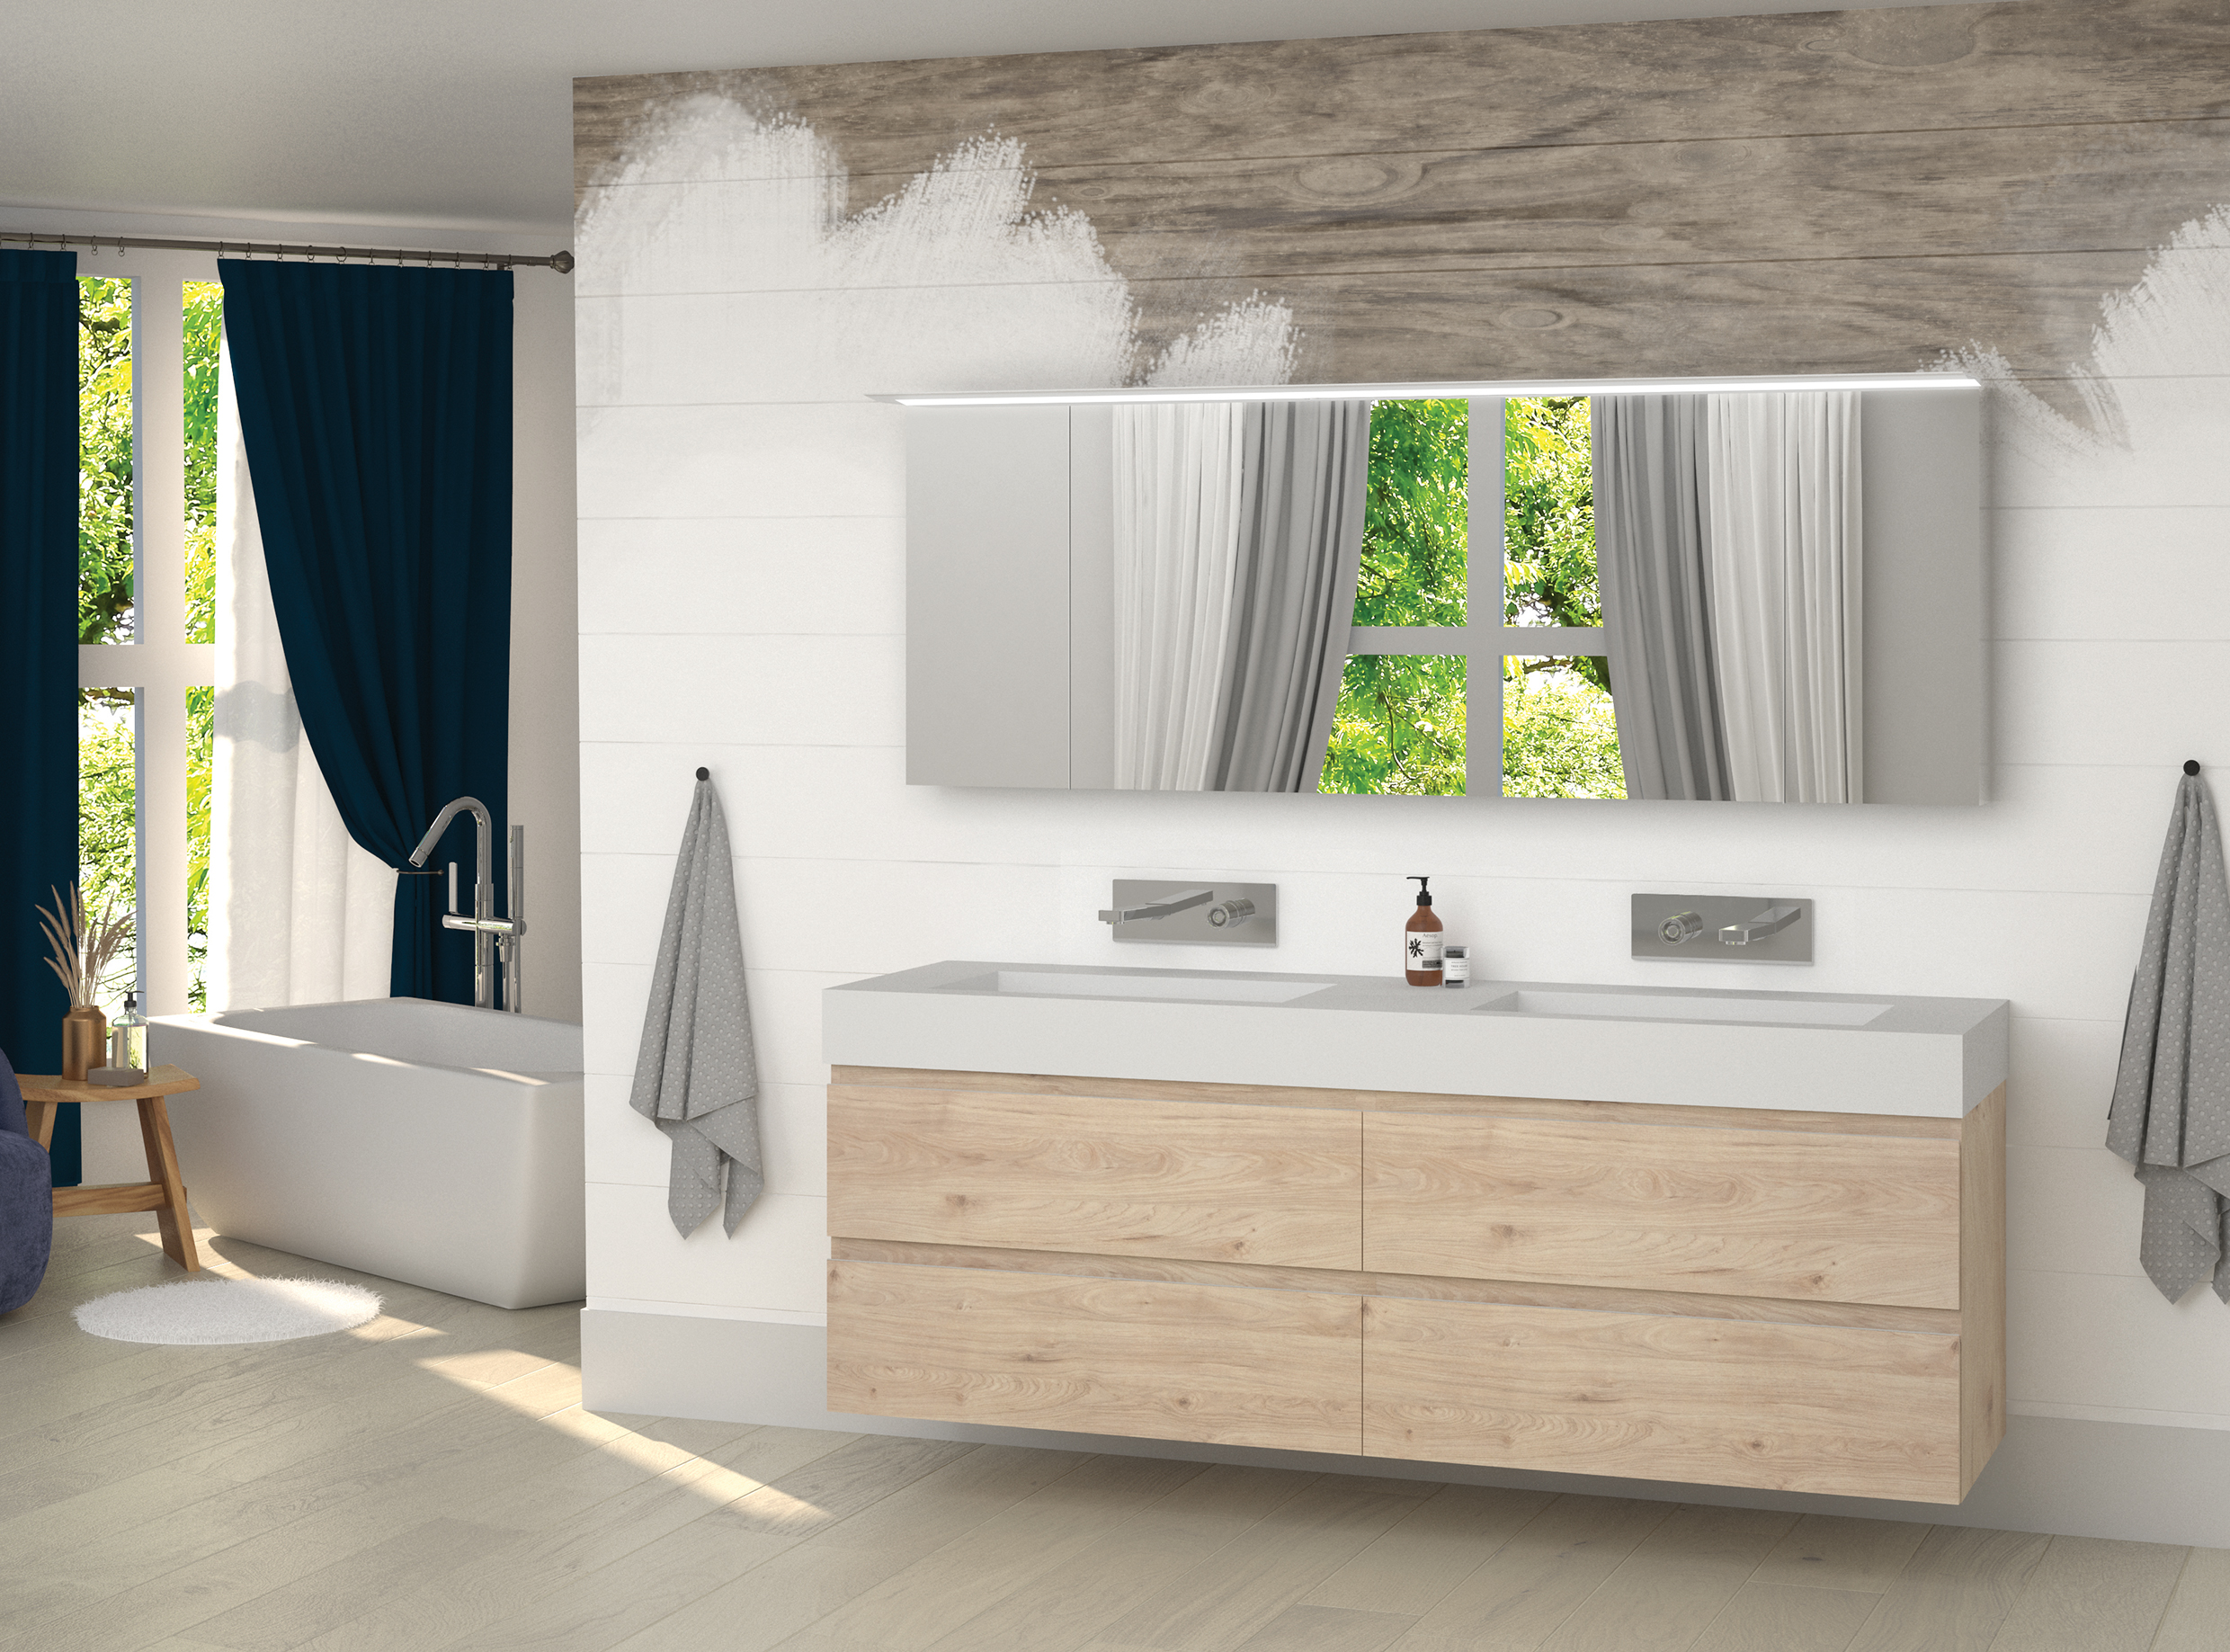 Renovating your bathroom: step by step